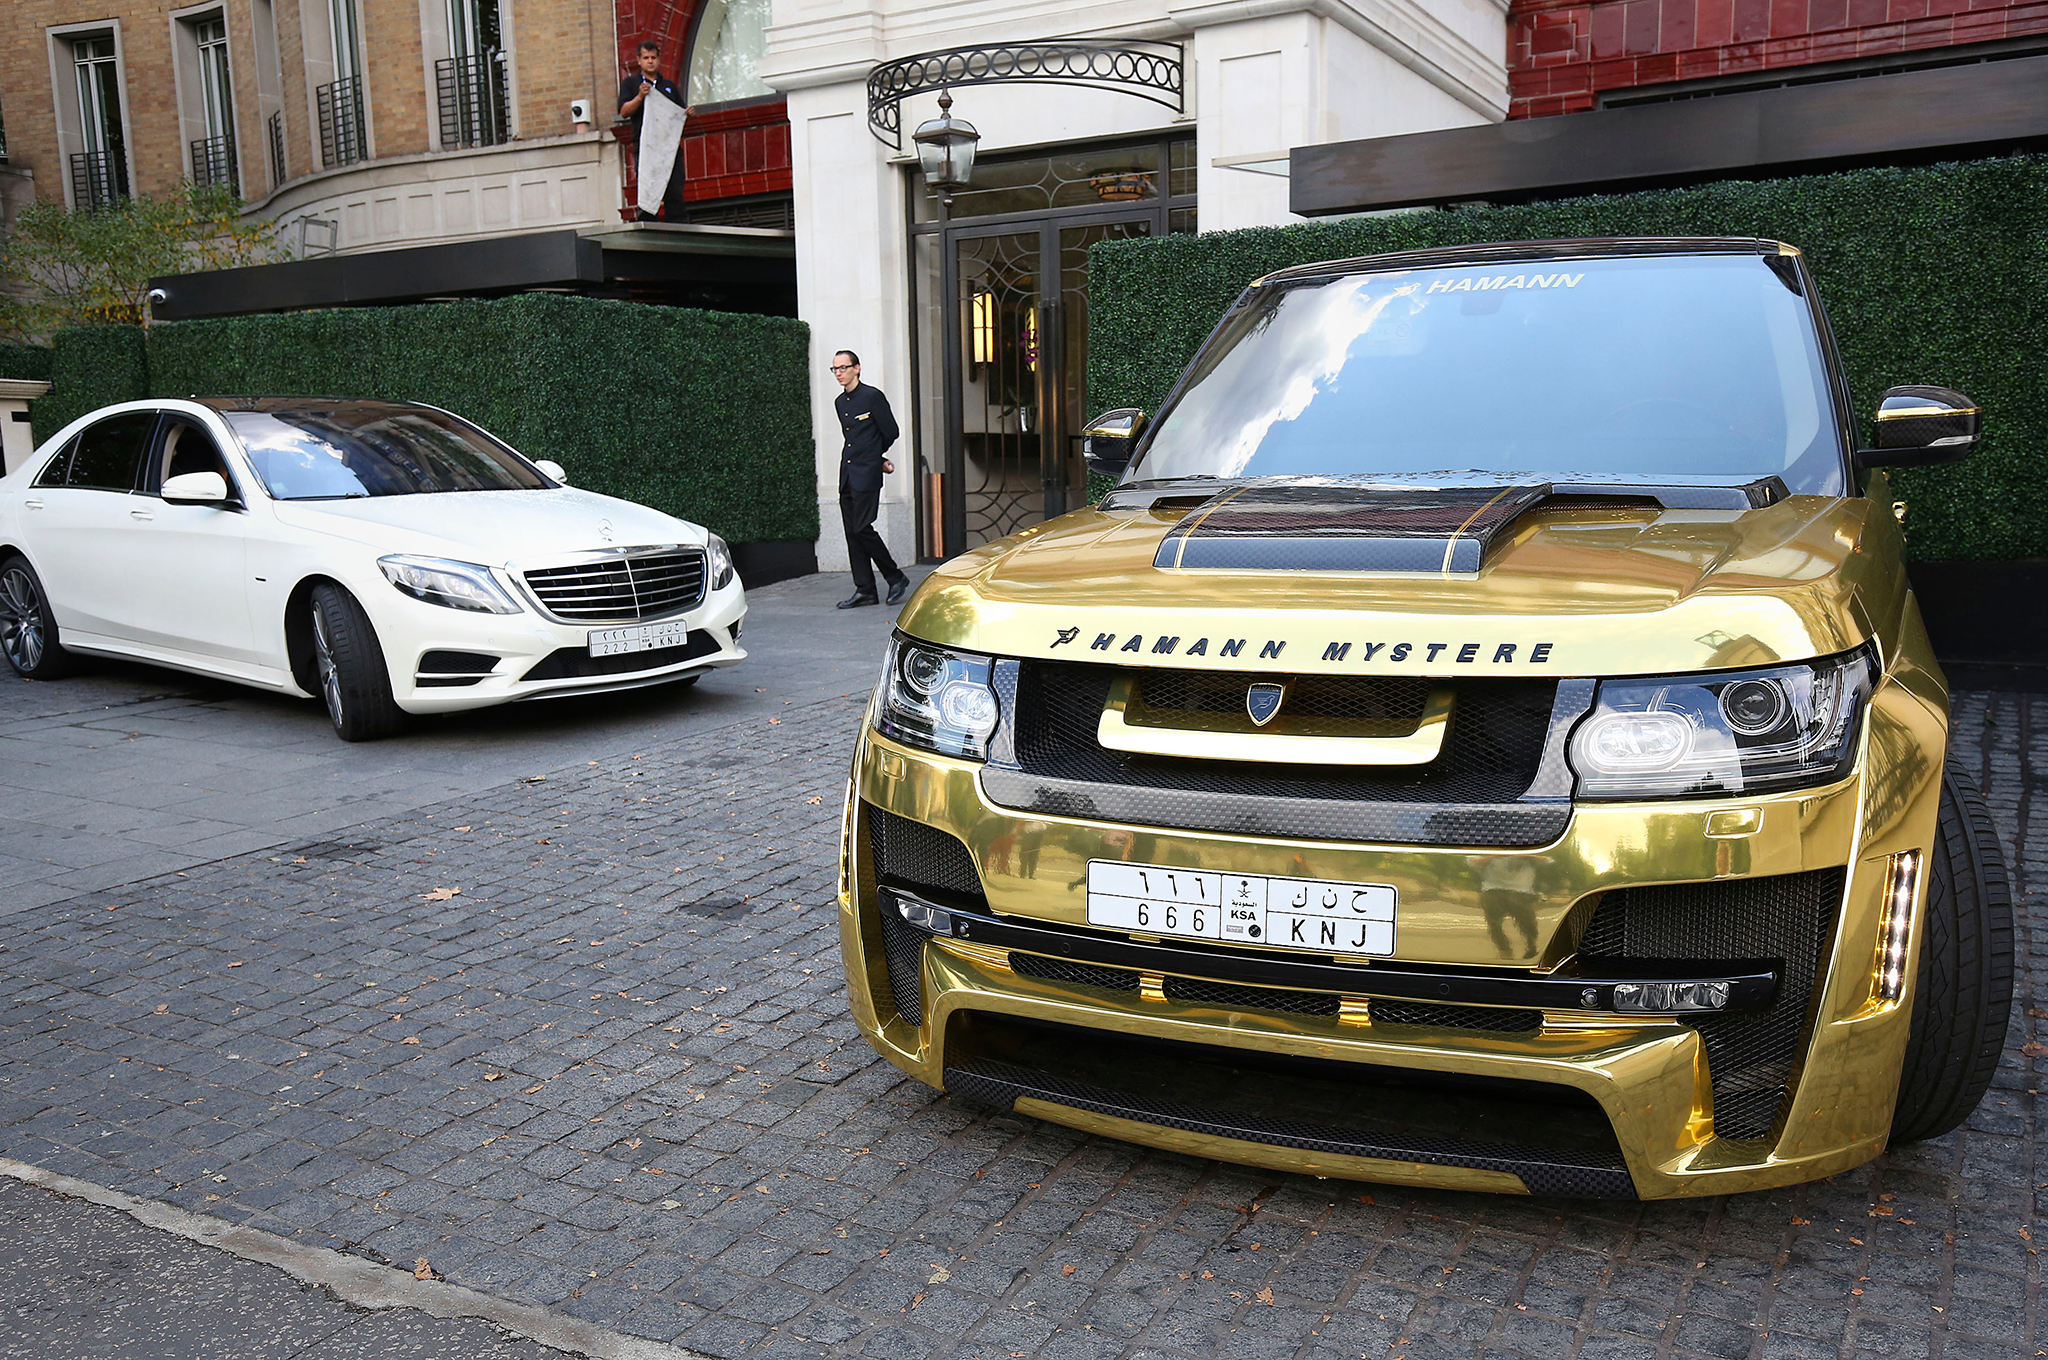 A Hamann Range Rover outside the Park Tower Hotel in Knightsbridge in London